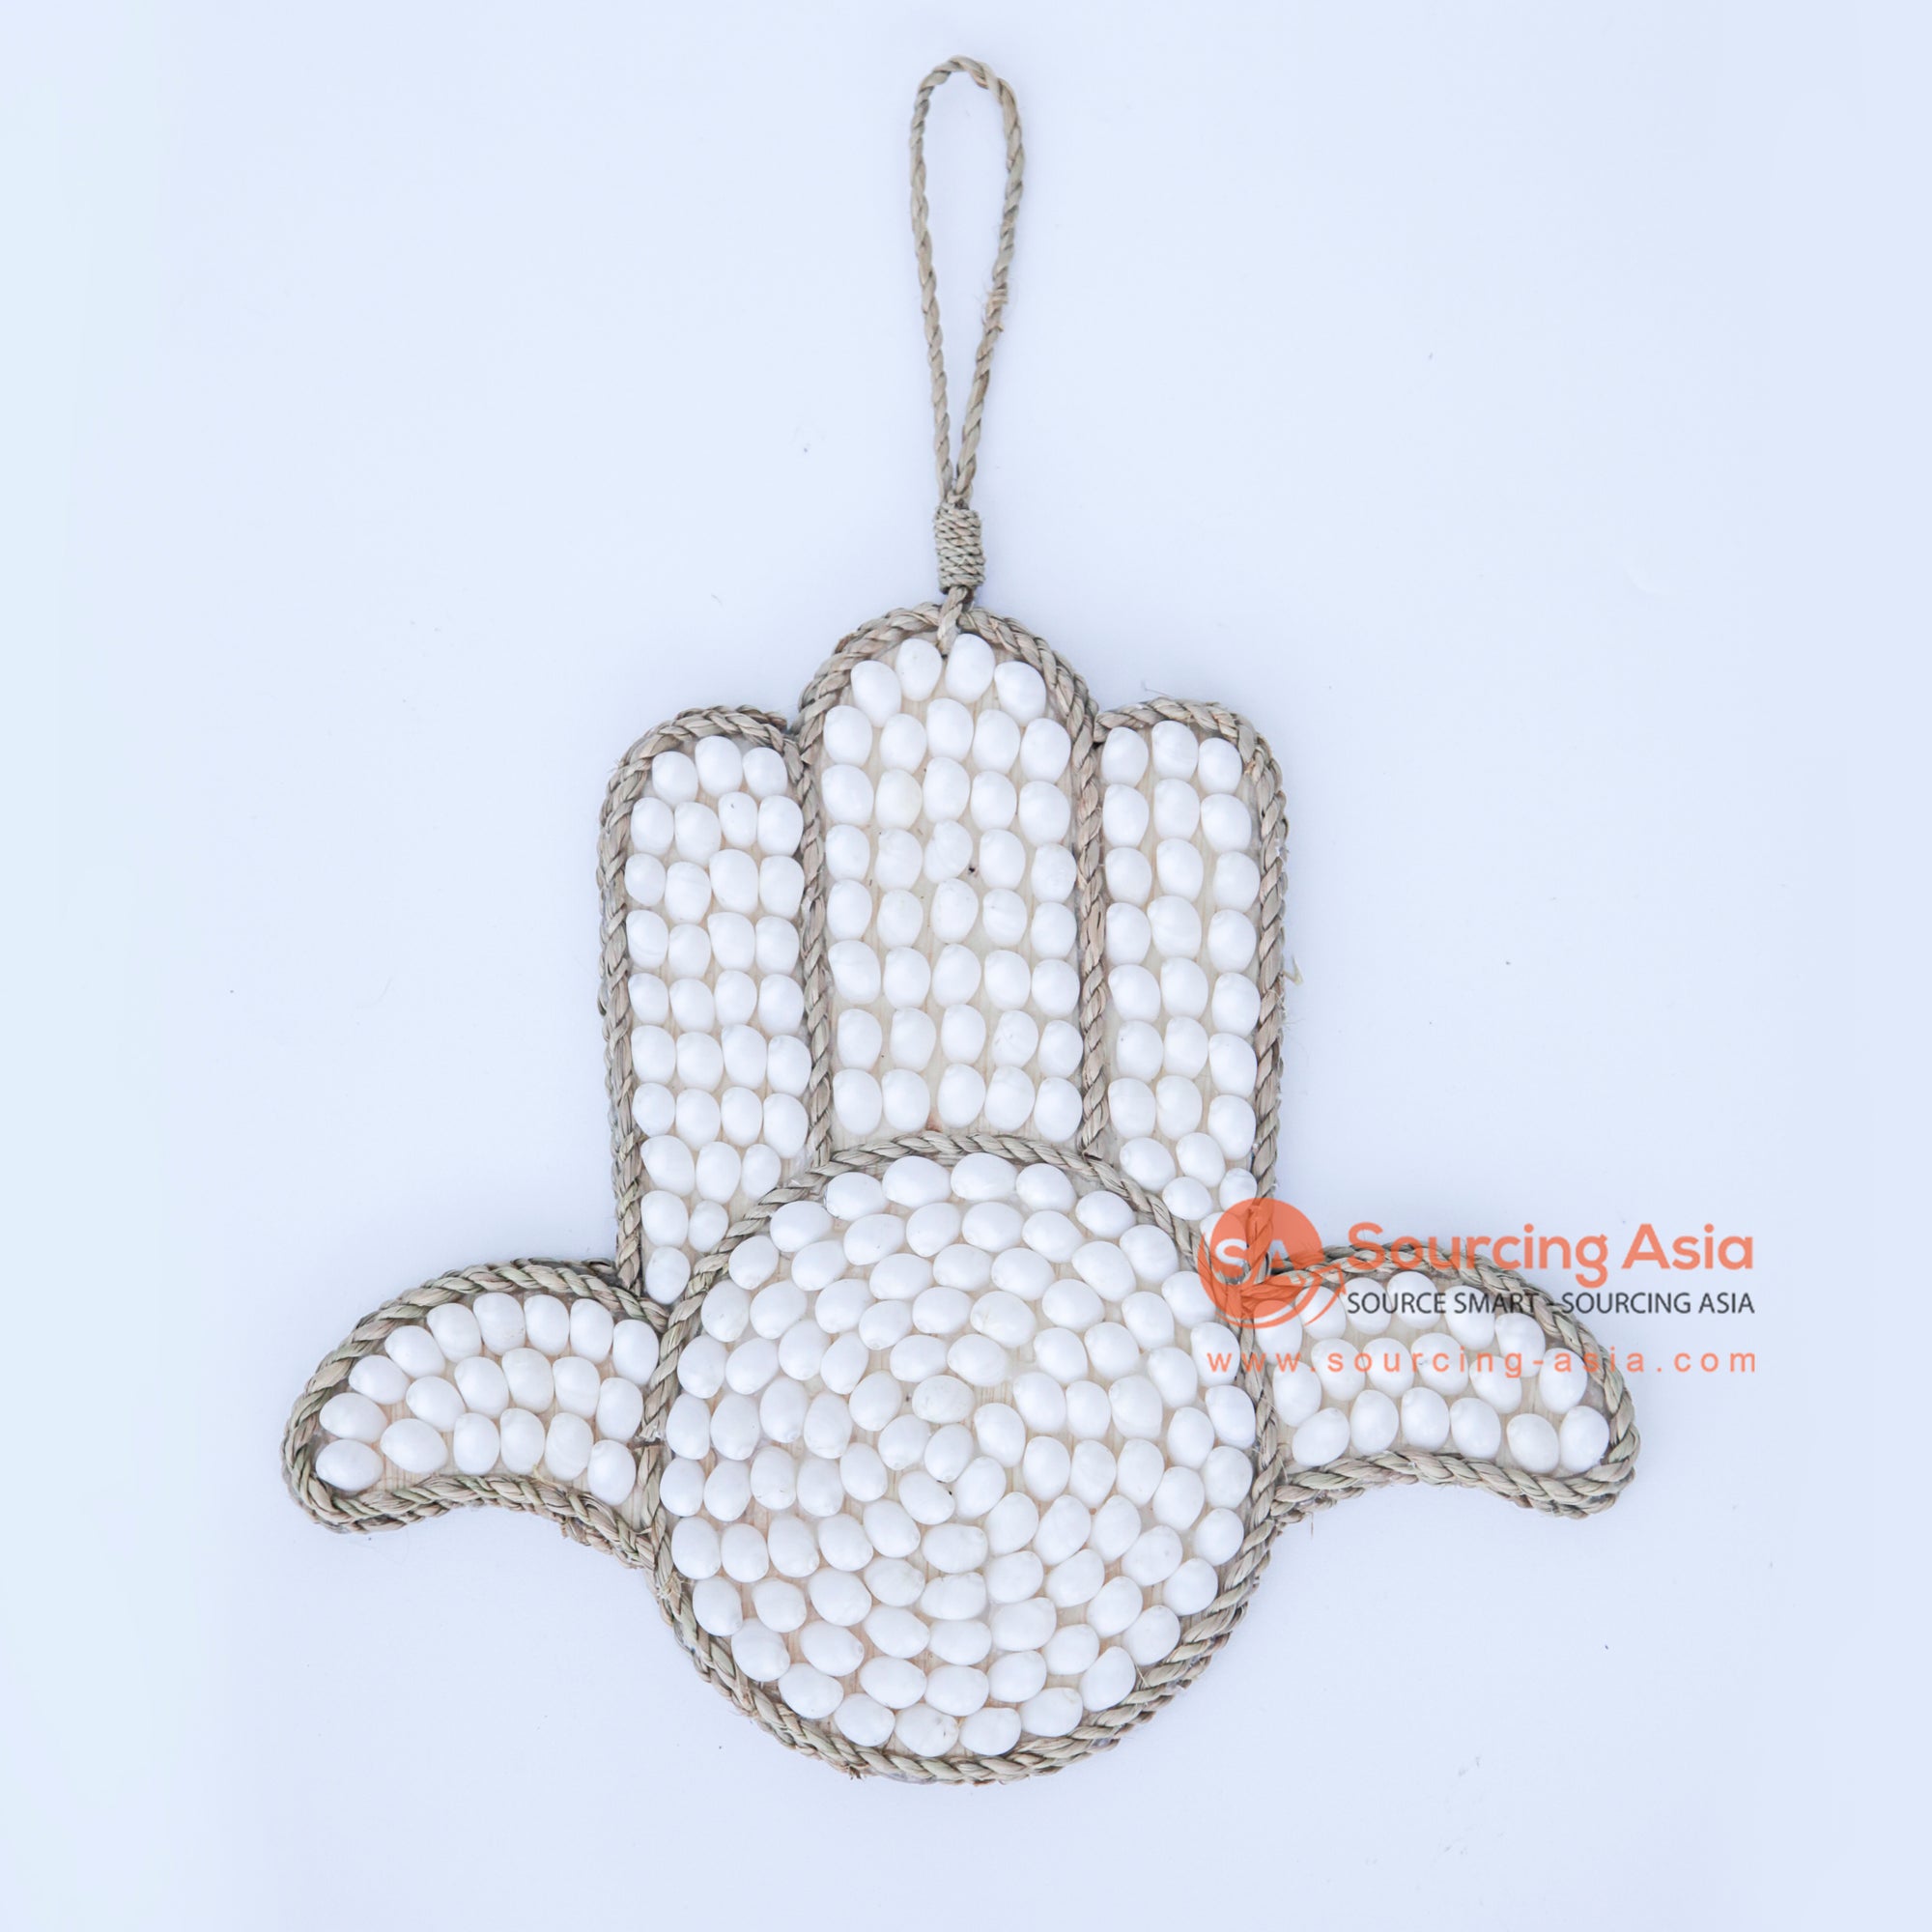 DHL048 WHITE SHELL PALM HAND SHAPED HANGING WALL DECORATION